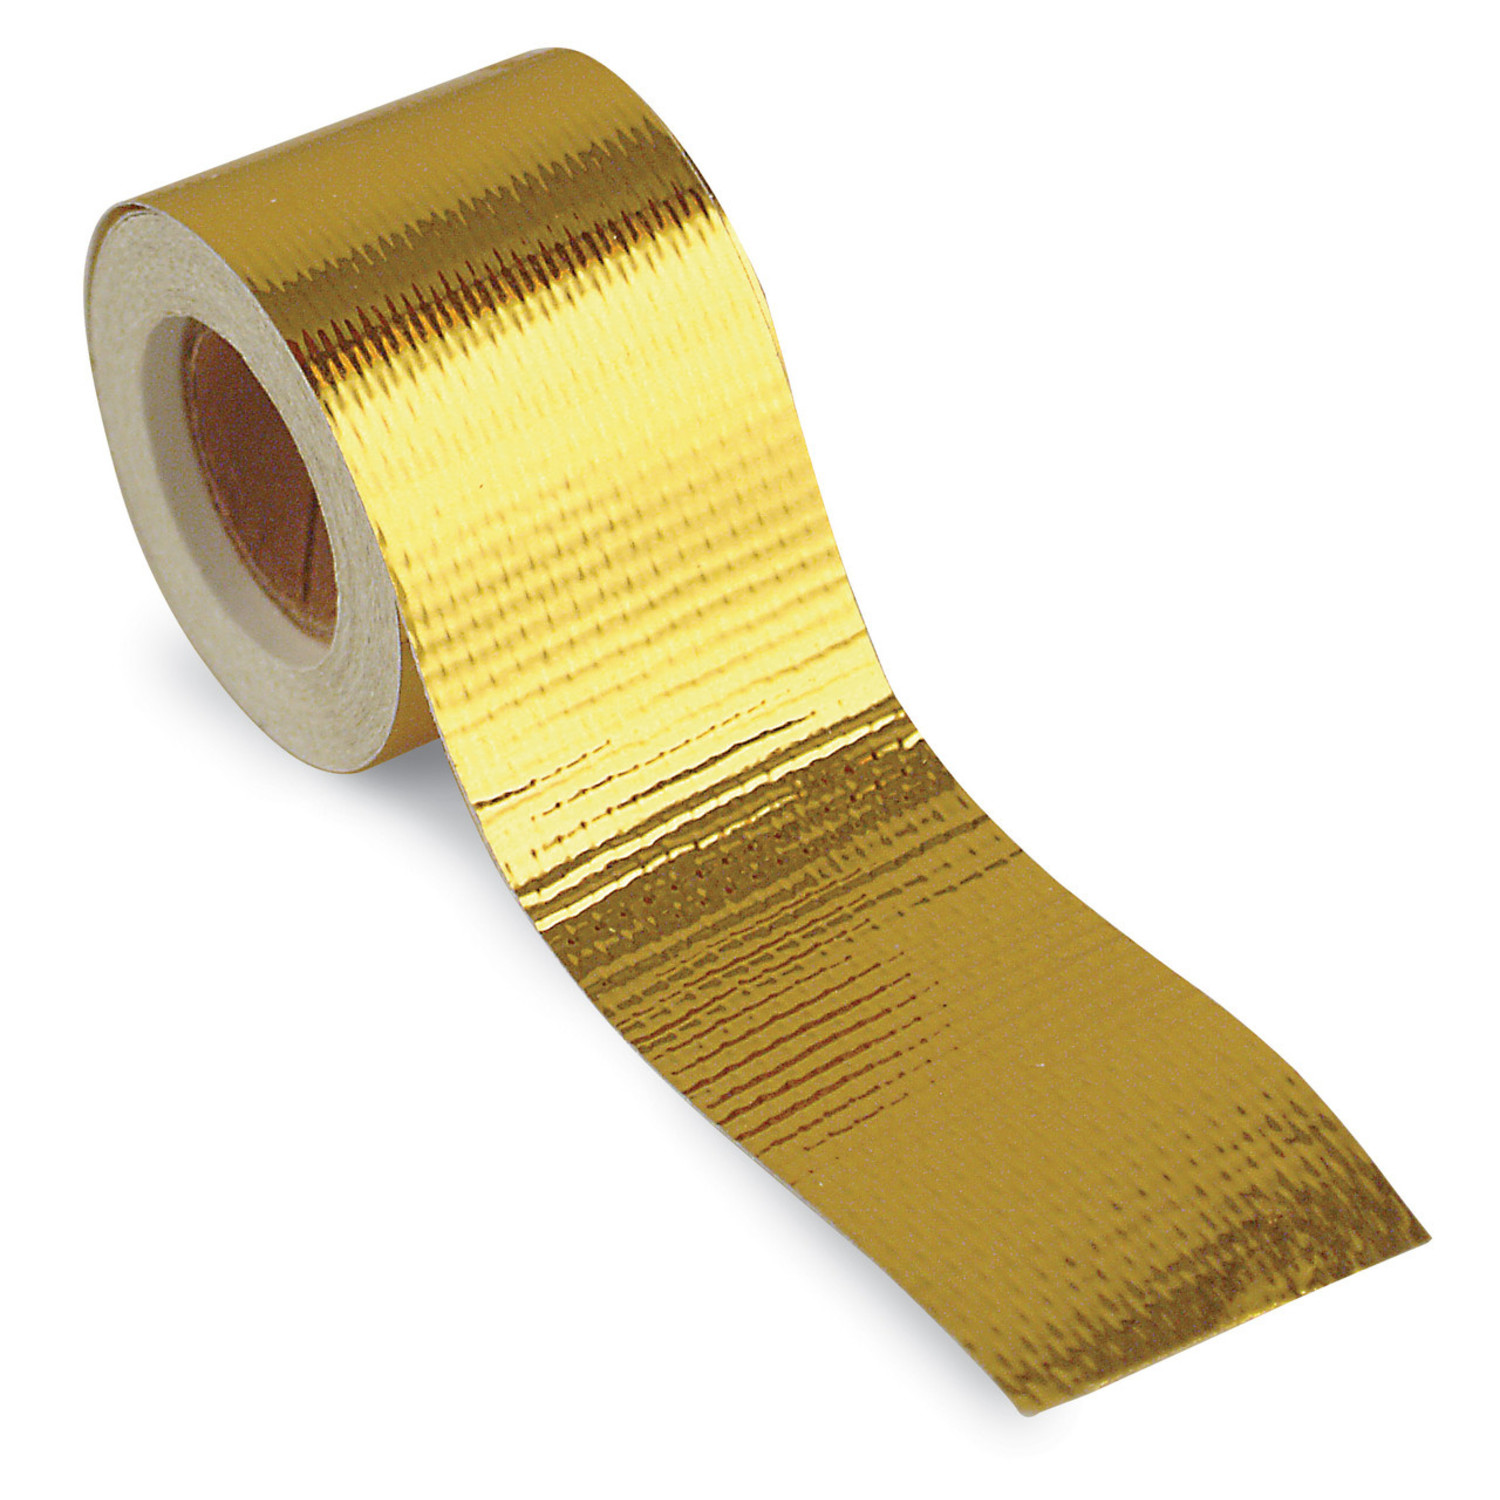 DKARDU Heat Shield Tape Reflect-A-Gold for Hose and Auto, High-Temperature  Heat Reflective Adhesive Backed Sheet, Self Adhesive Reflect Gold Heat Wrap